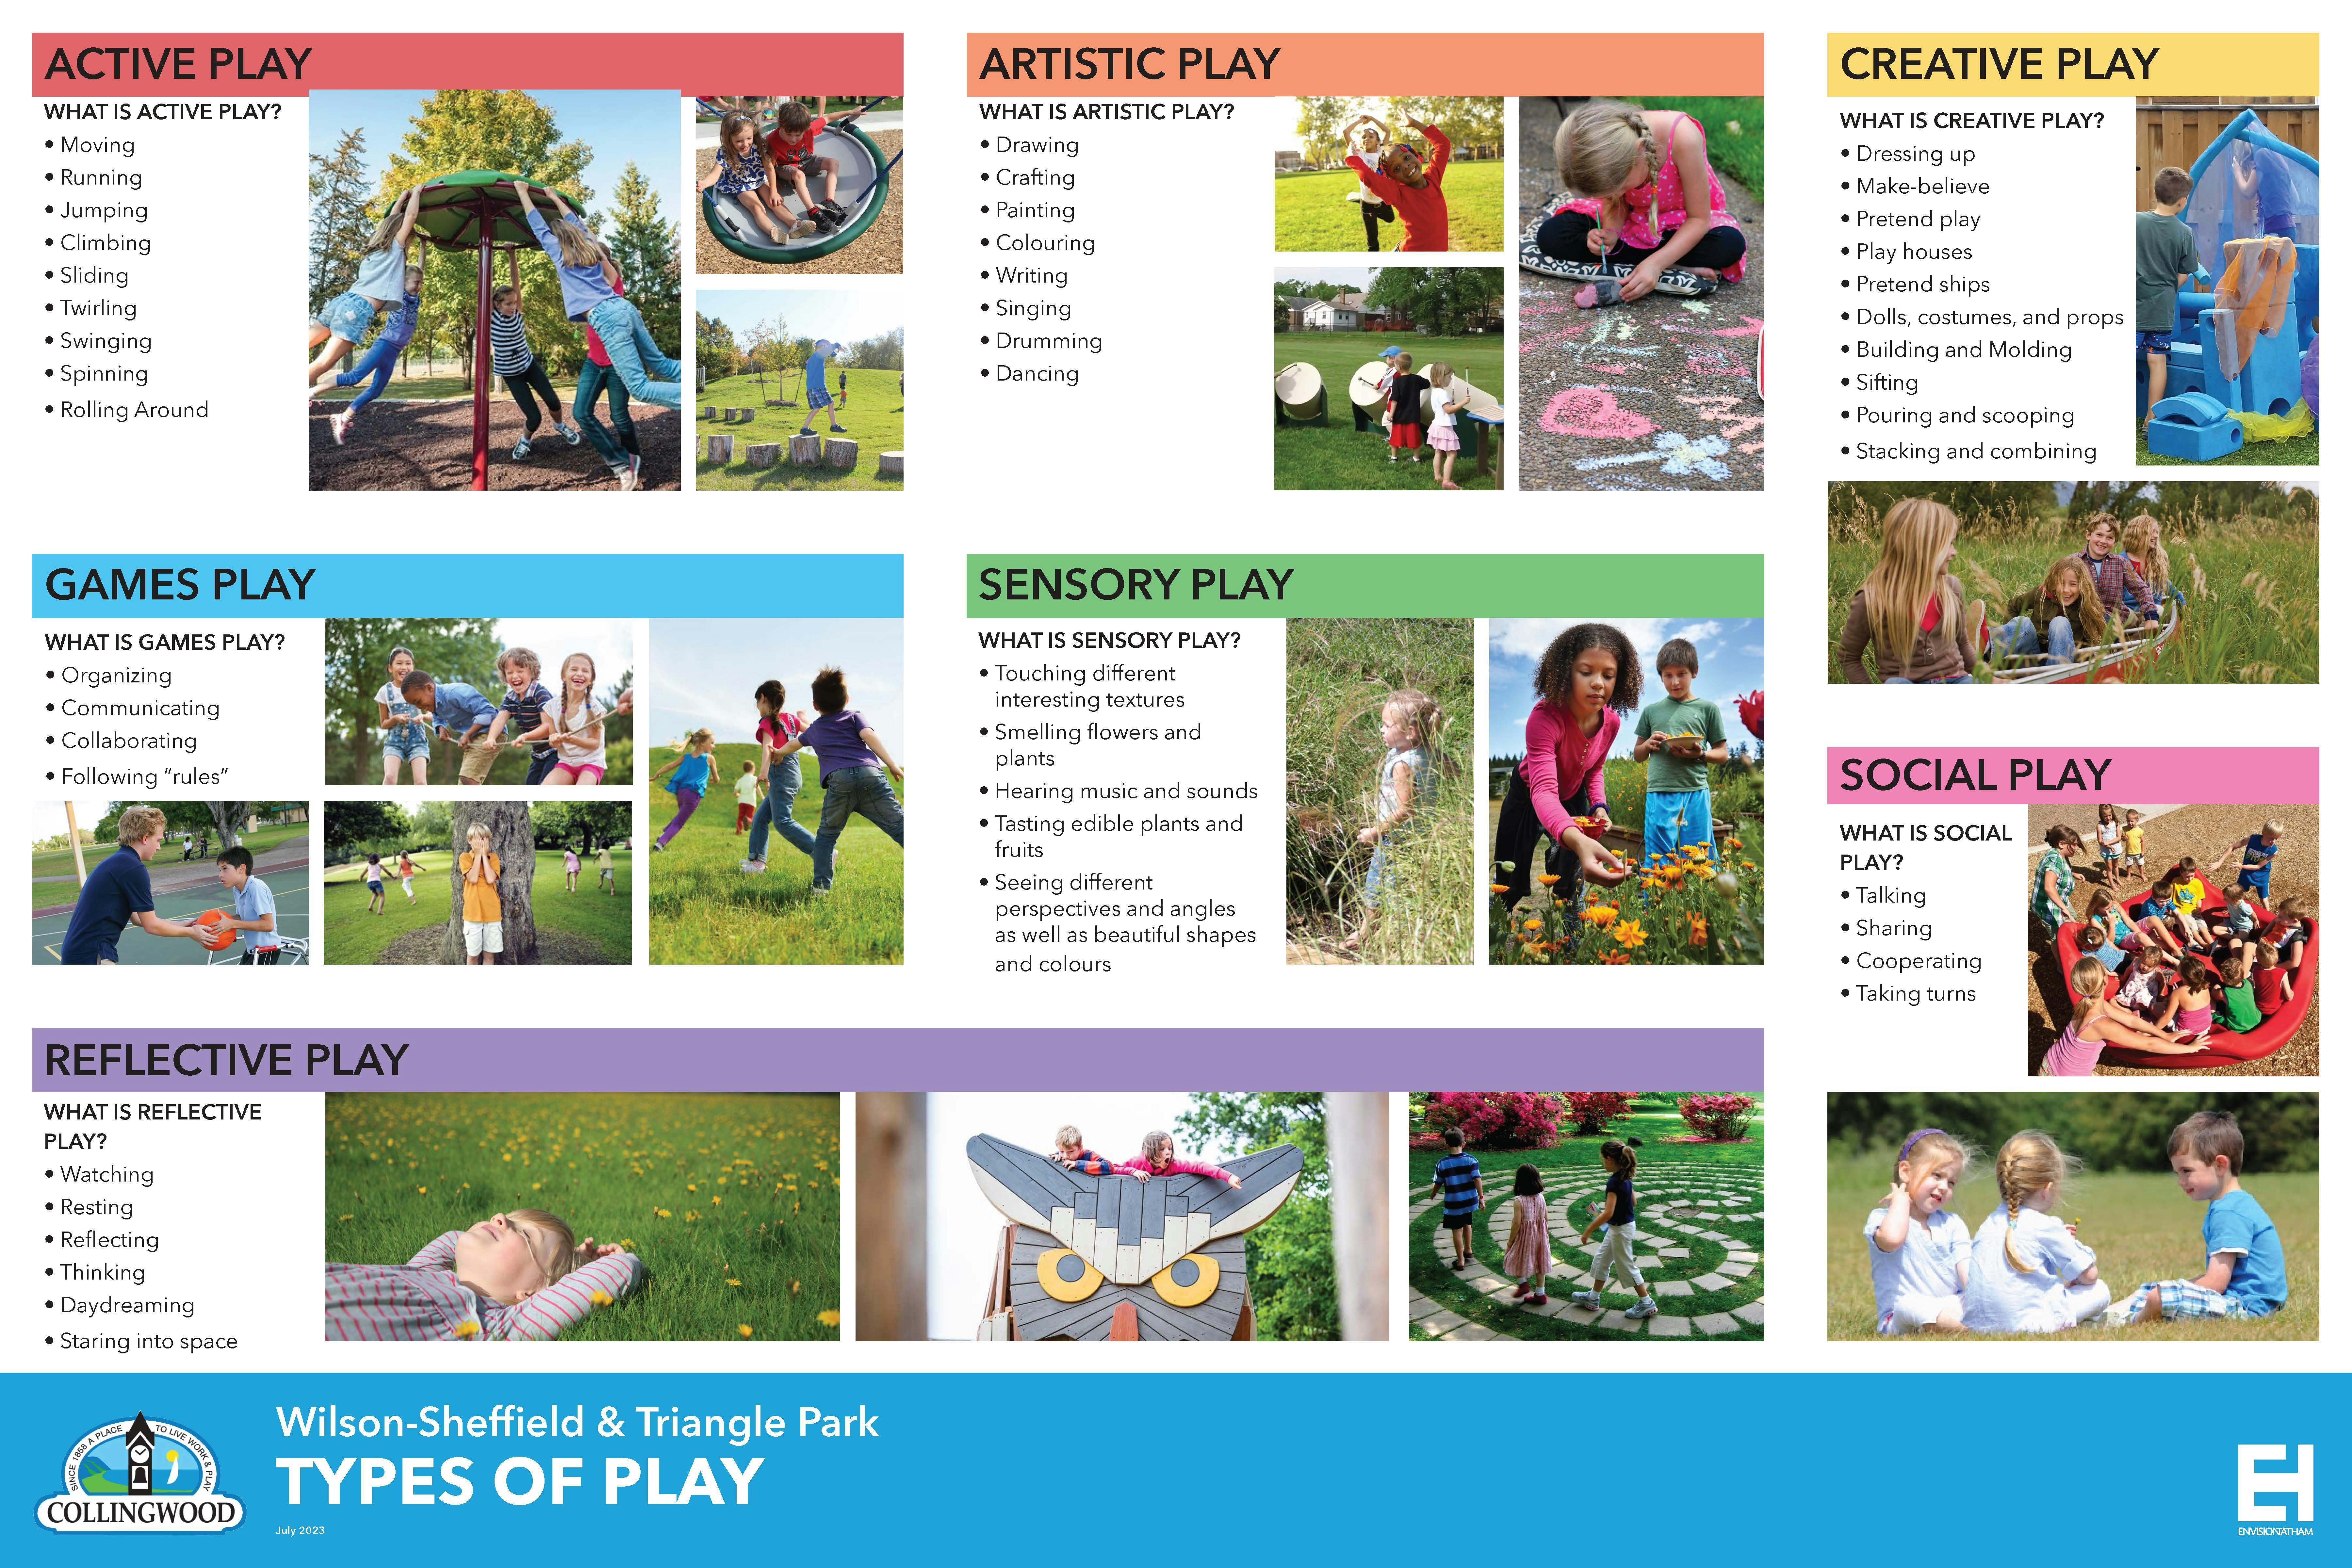 Visual of the different types of play including Active Play, Artistic Play, Creative Play, Games Play, Sensory Play, Social Play, and Reflective Play.